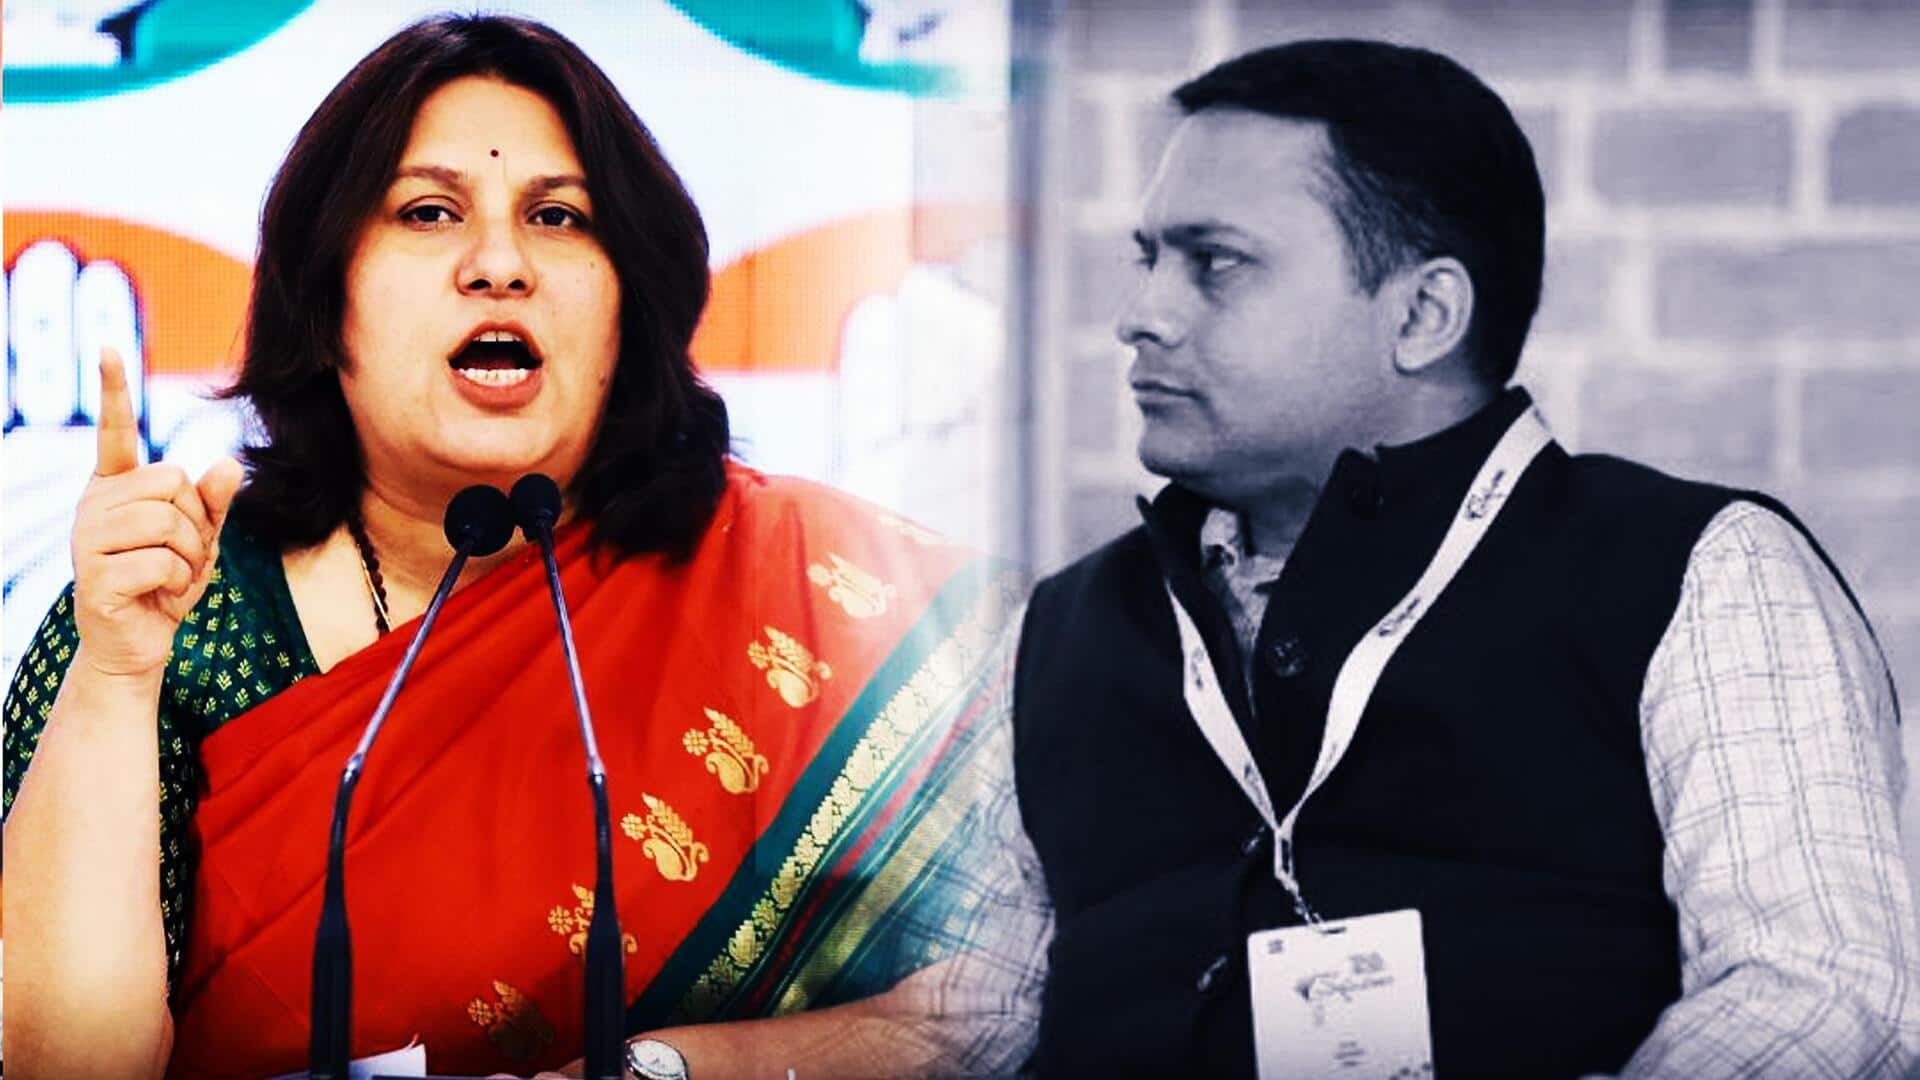 Congress demands Amit Malviya's removal over 'sexual exploitation' allegations